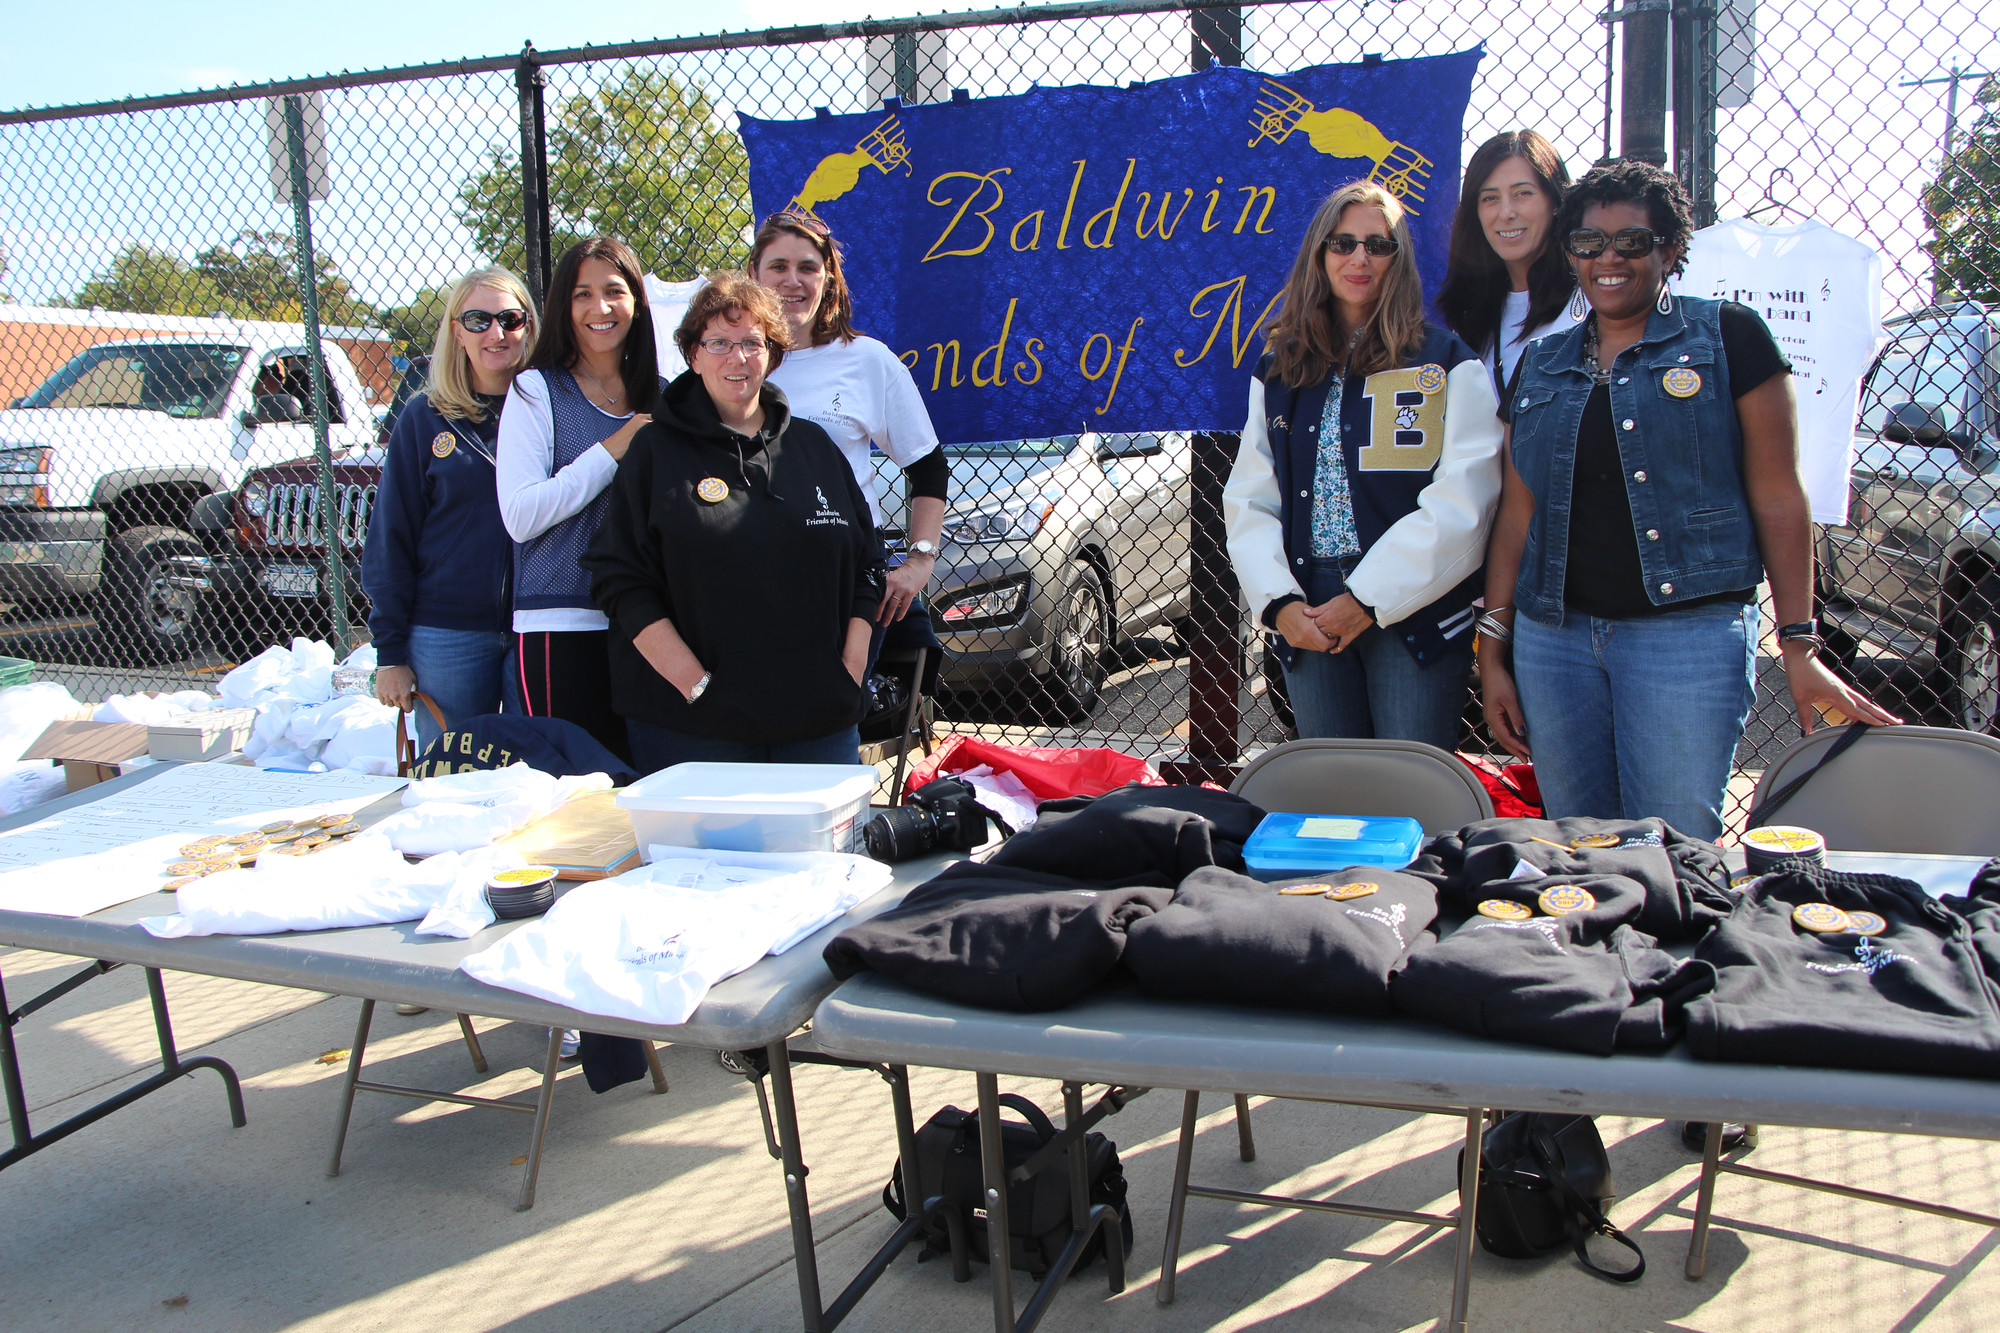 Baldwin Friends of Music had many volunteers on hand selling shirts, pants and sweats. From left were Lori Fitzpatrict, Isa Zambrano, Donna McDougal, Cathy Clark, Lisa Costello-Orselli, Gwenth Zito and Shelia Jefferson Issac.